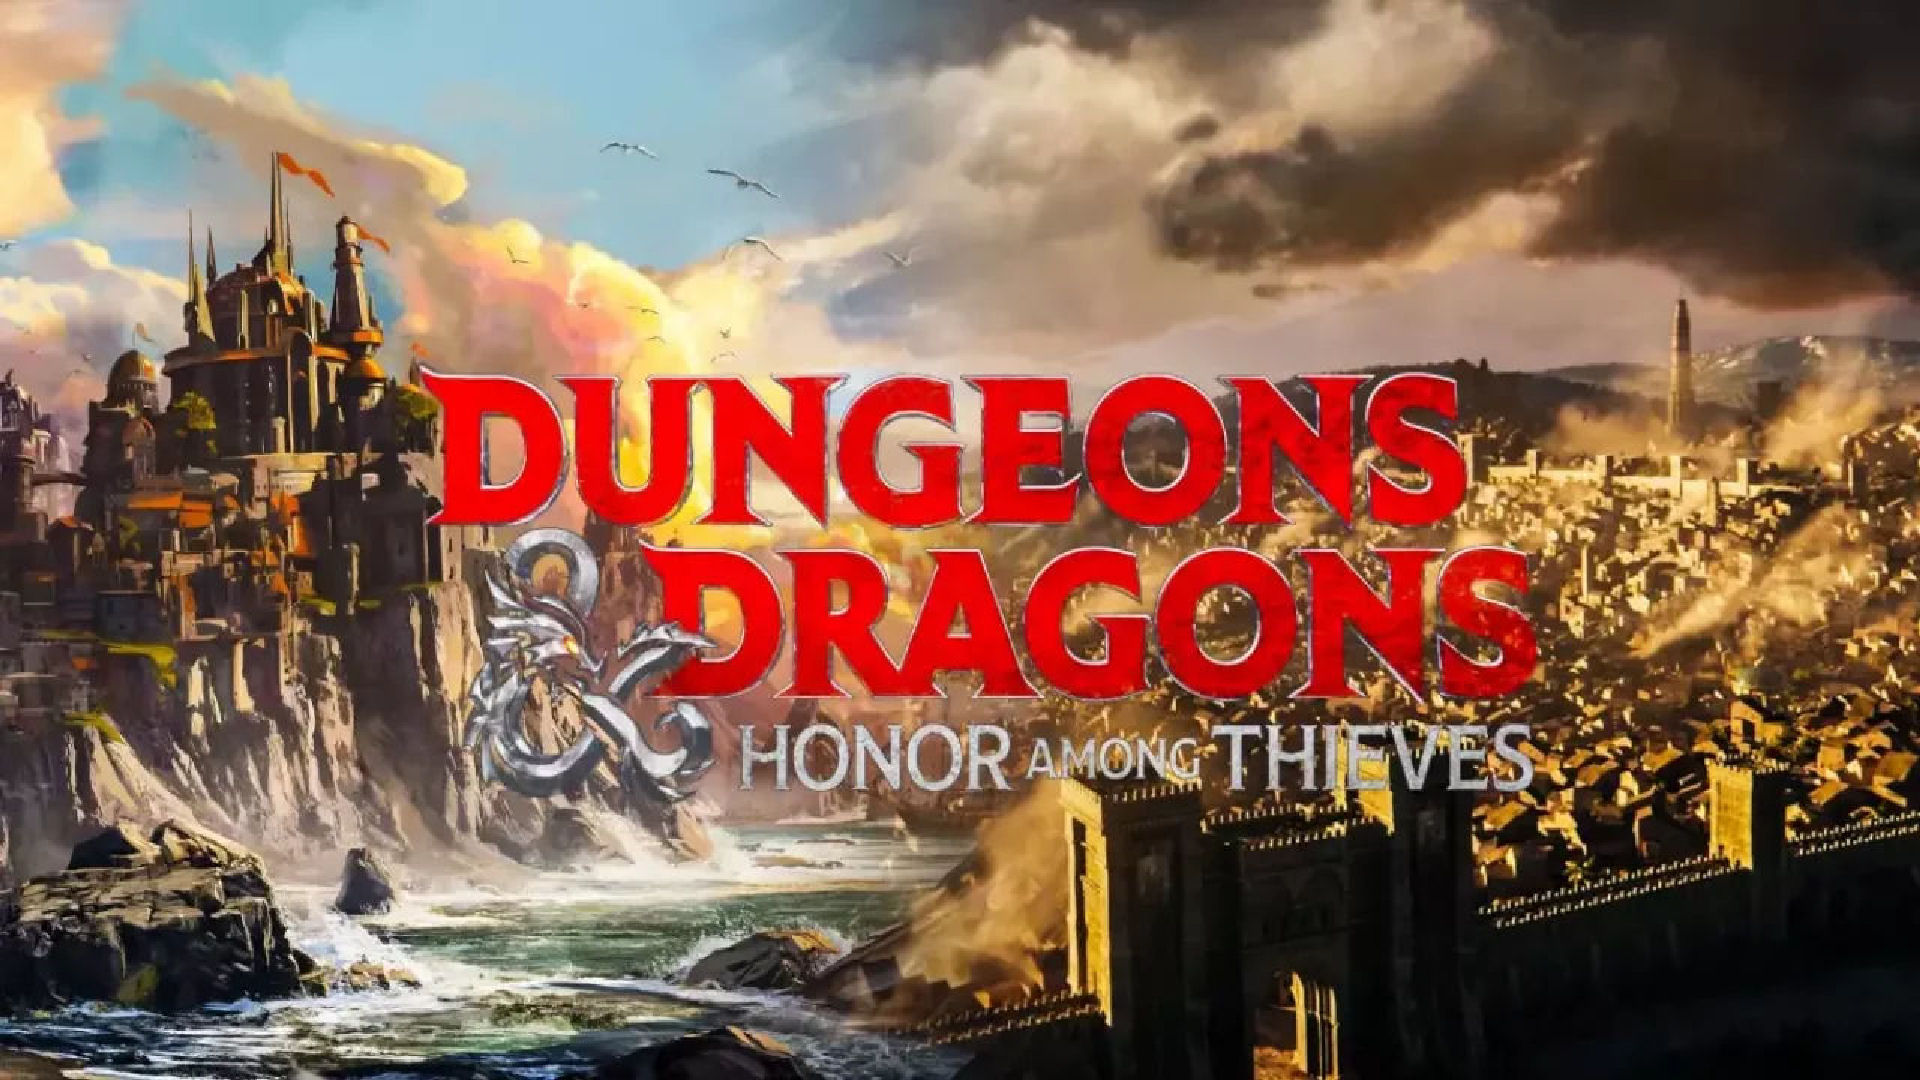 Dungeons & Dragons: Honor among thieves